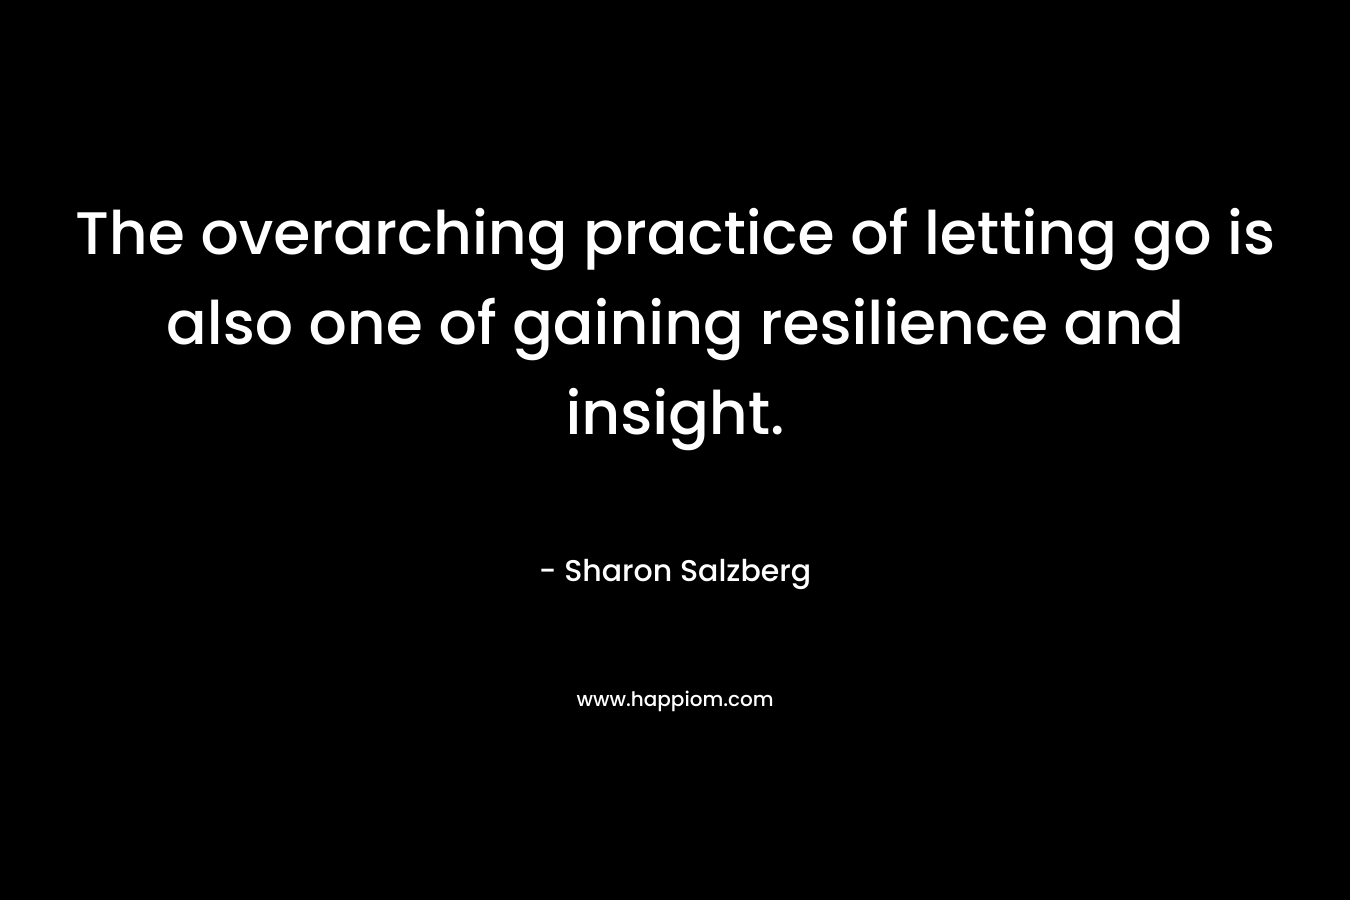 The overarching practice of letting go is also one of gaining resilience and insight. – Sharon Salzberg